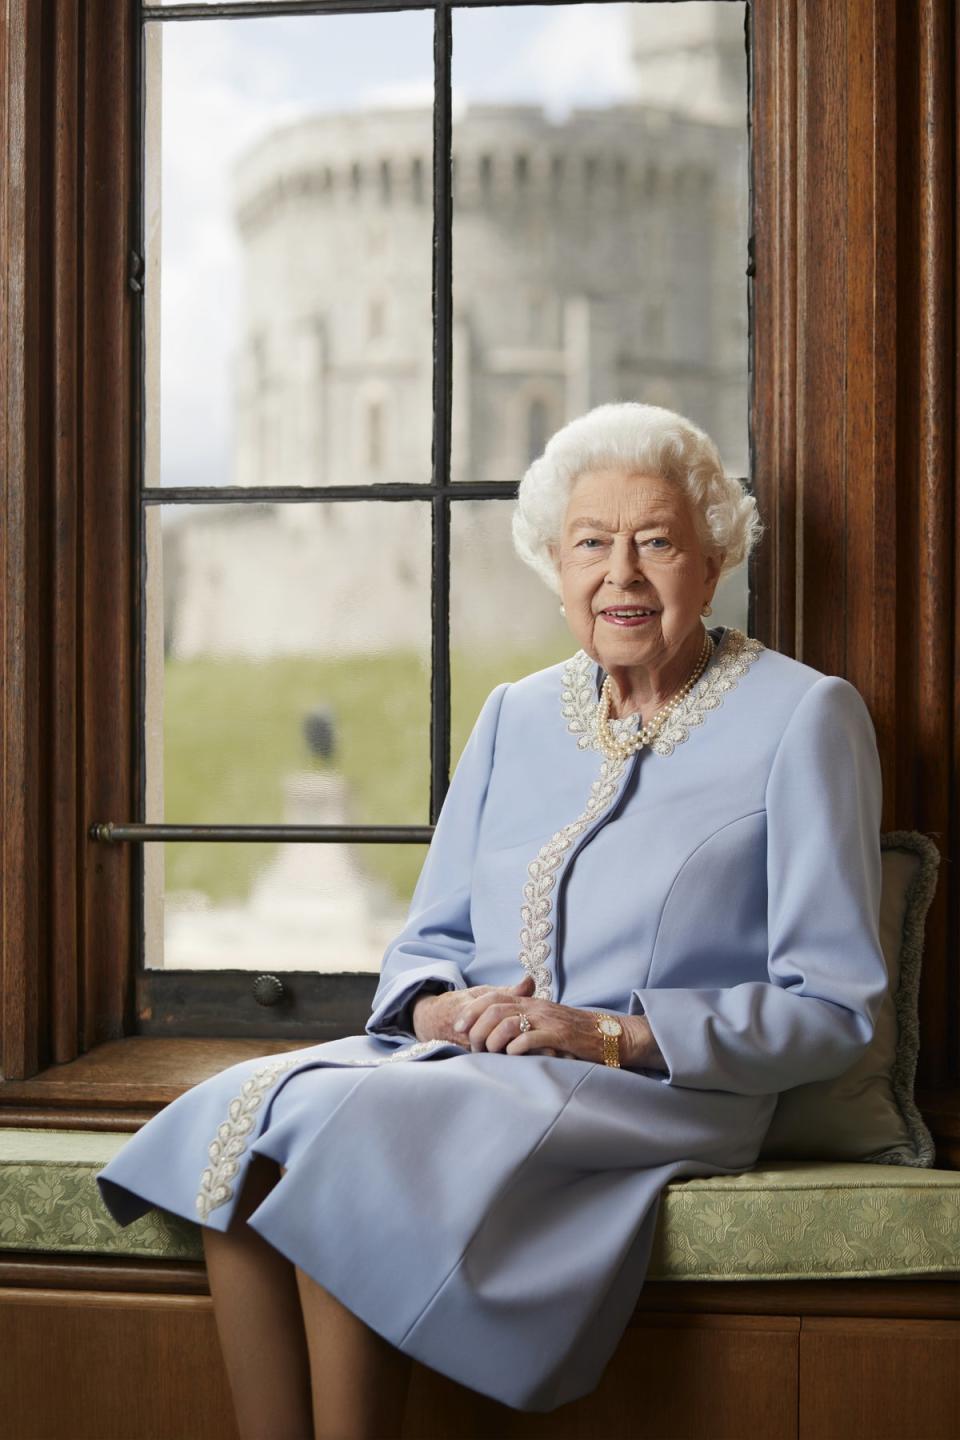 The Queen in her private apartments (Royal Household/Ranald Mackechnie/PA) (PA Media)